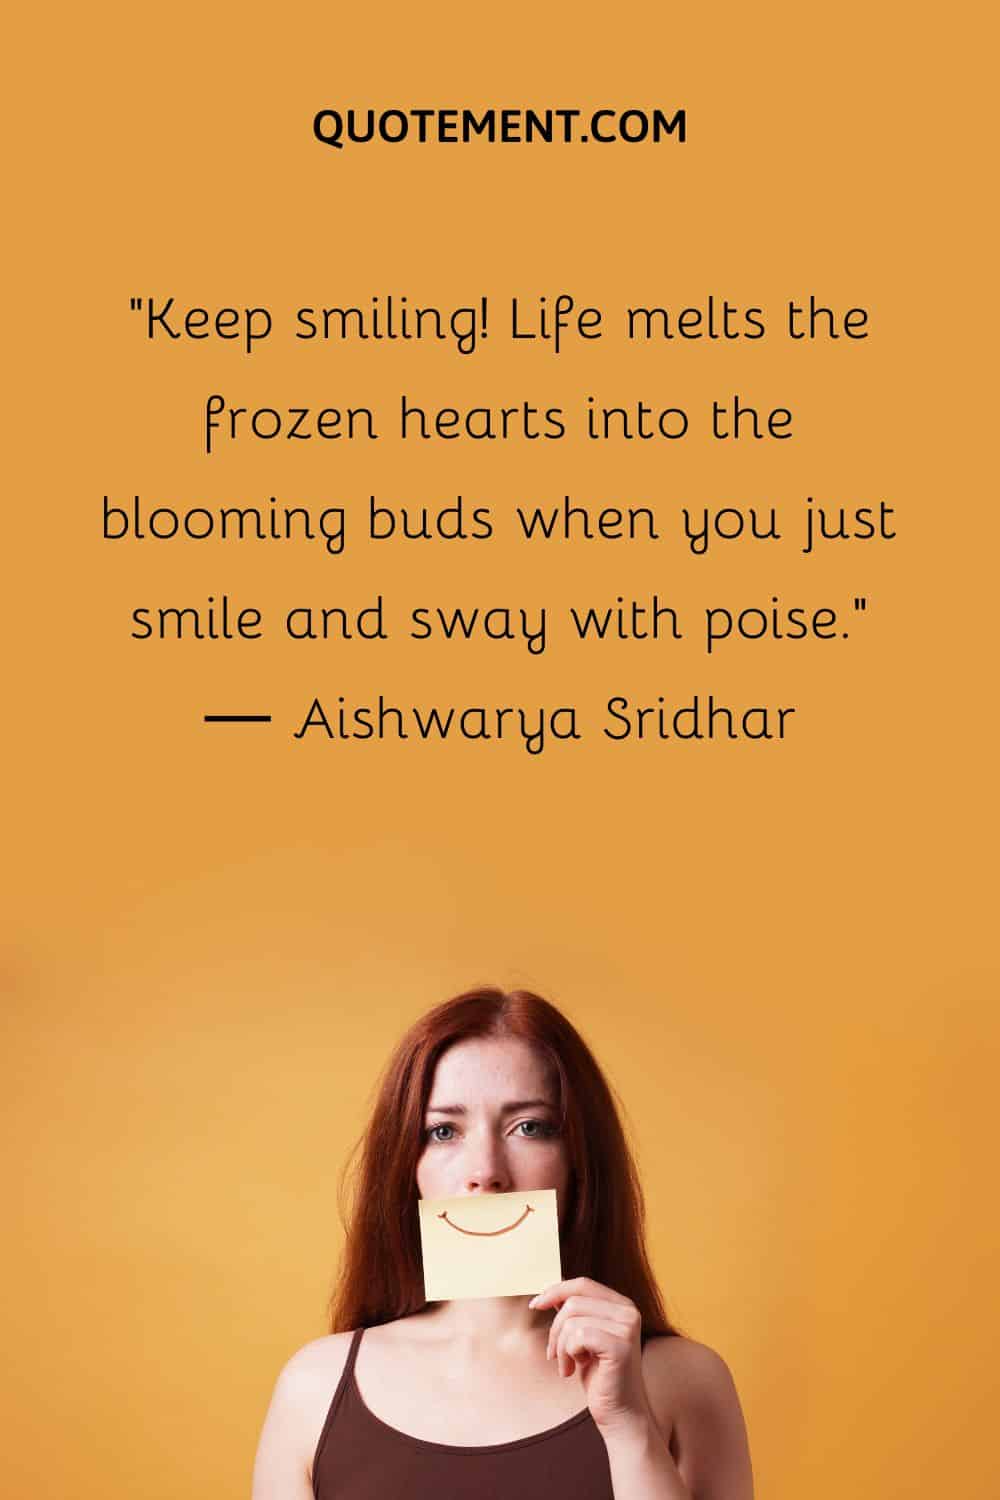 Keep smiling! Life melts the frozen hearts into the blooming buds